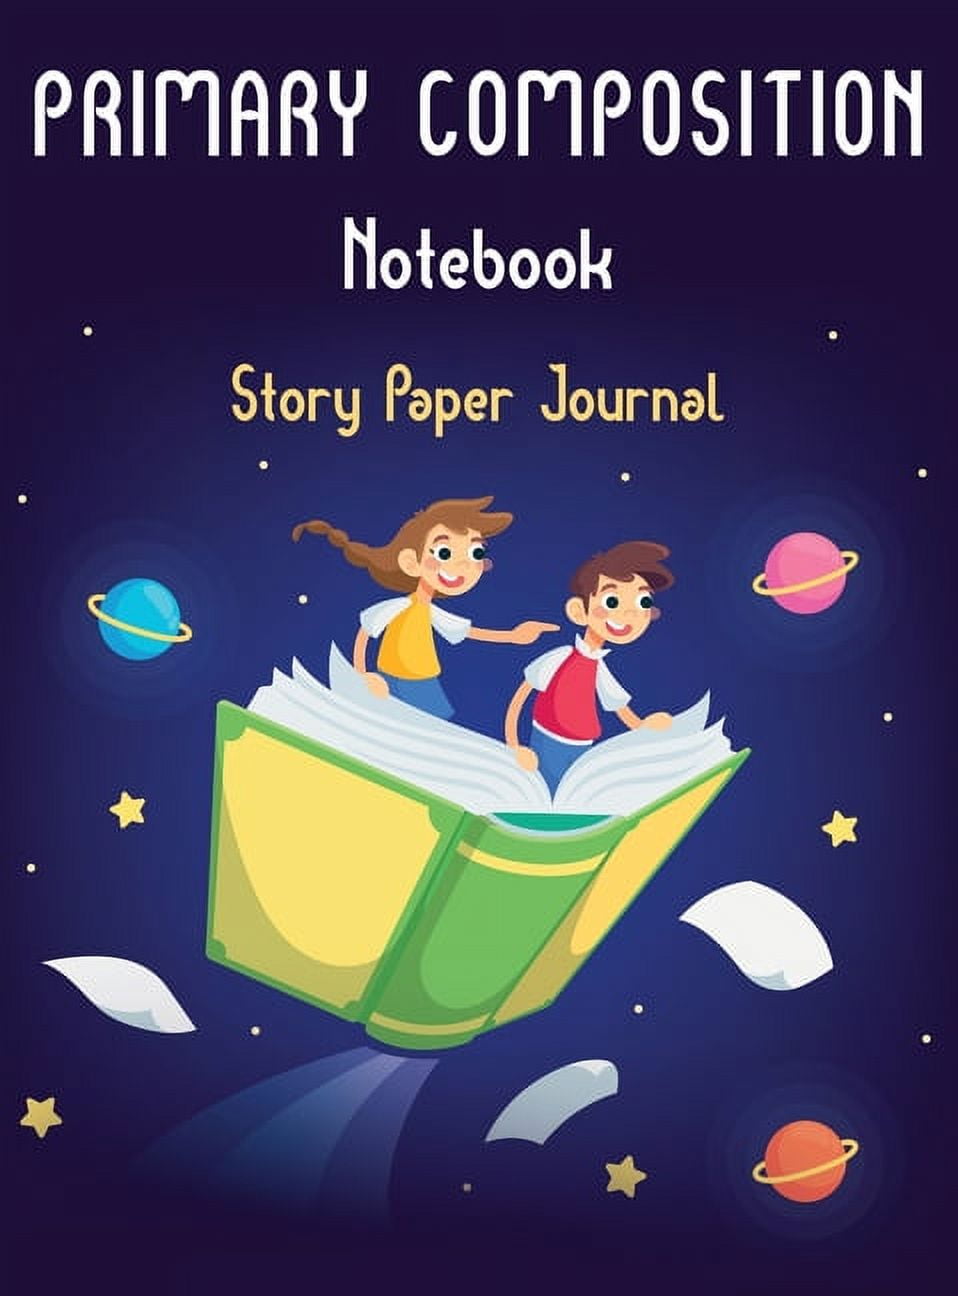 Primary Composition Notebook, Story Paper Journal 9781716160516